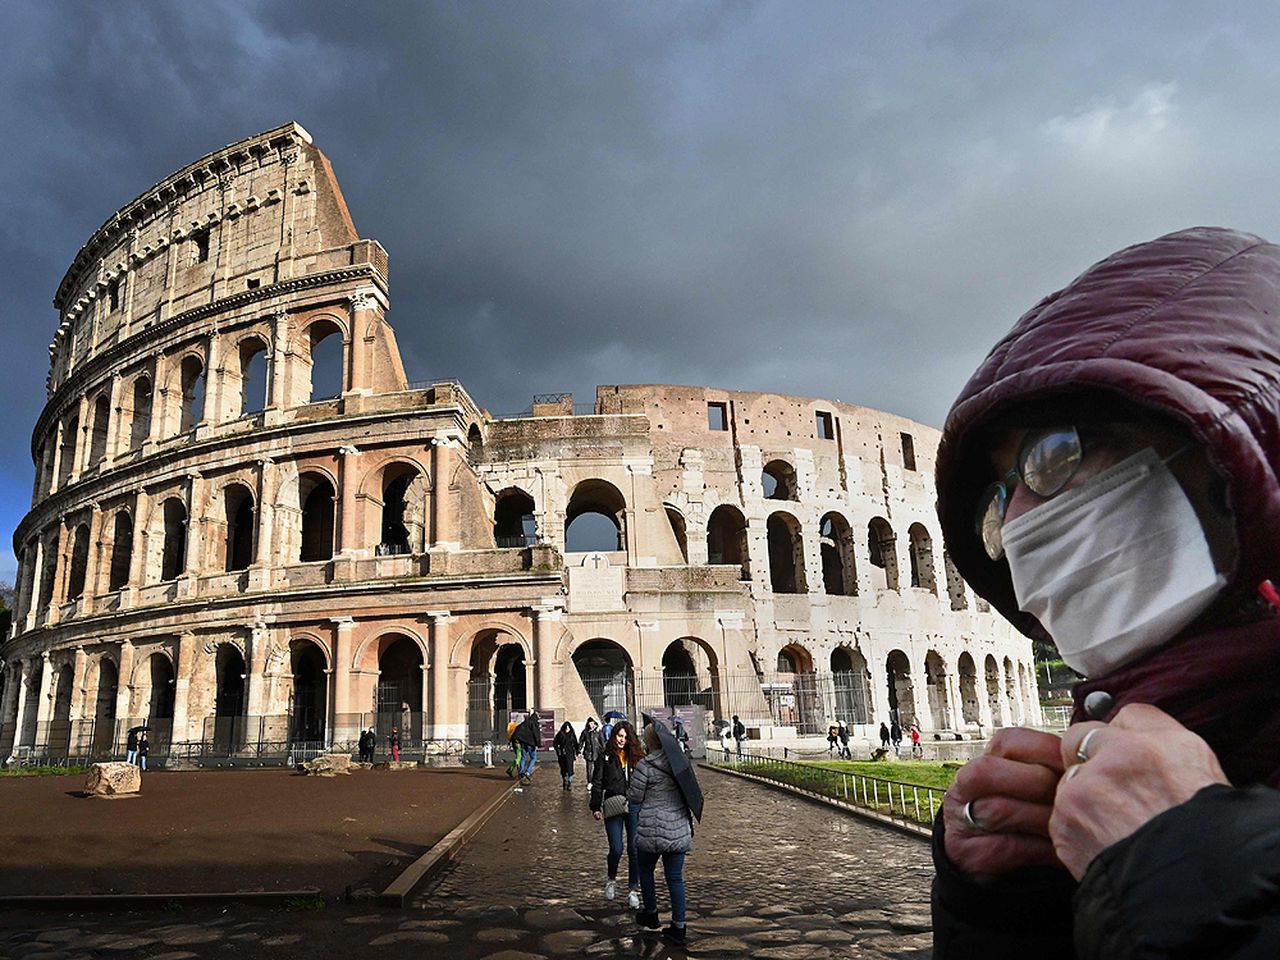 Italy is also closing down places that attract large numbers of people, image via Getty Images